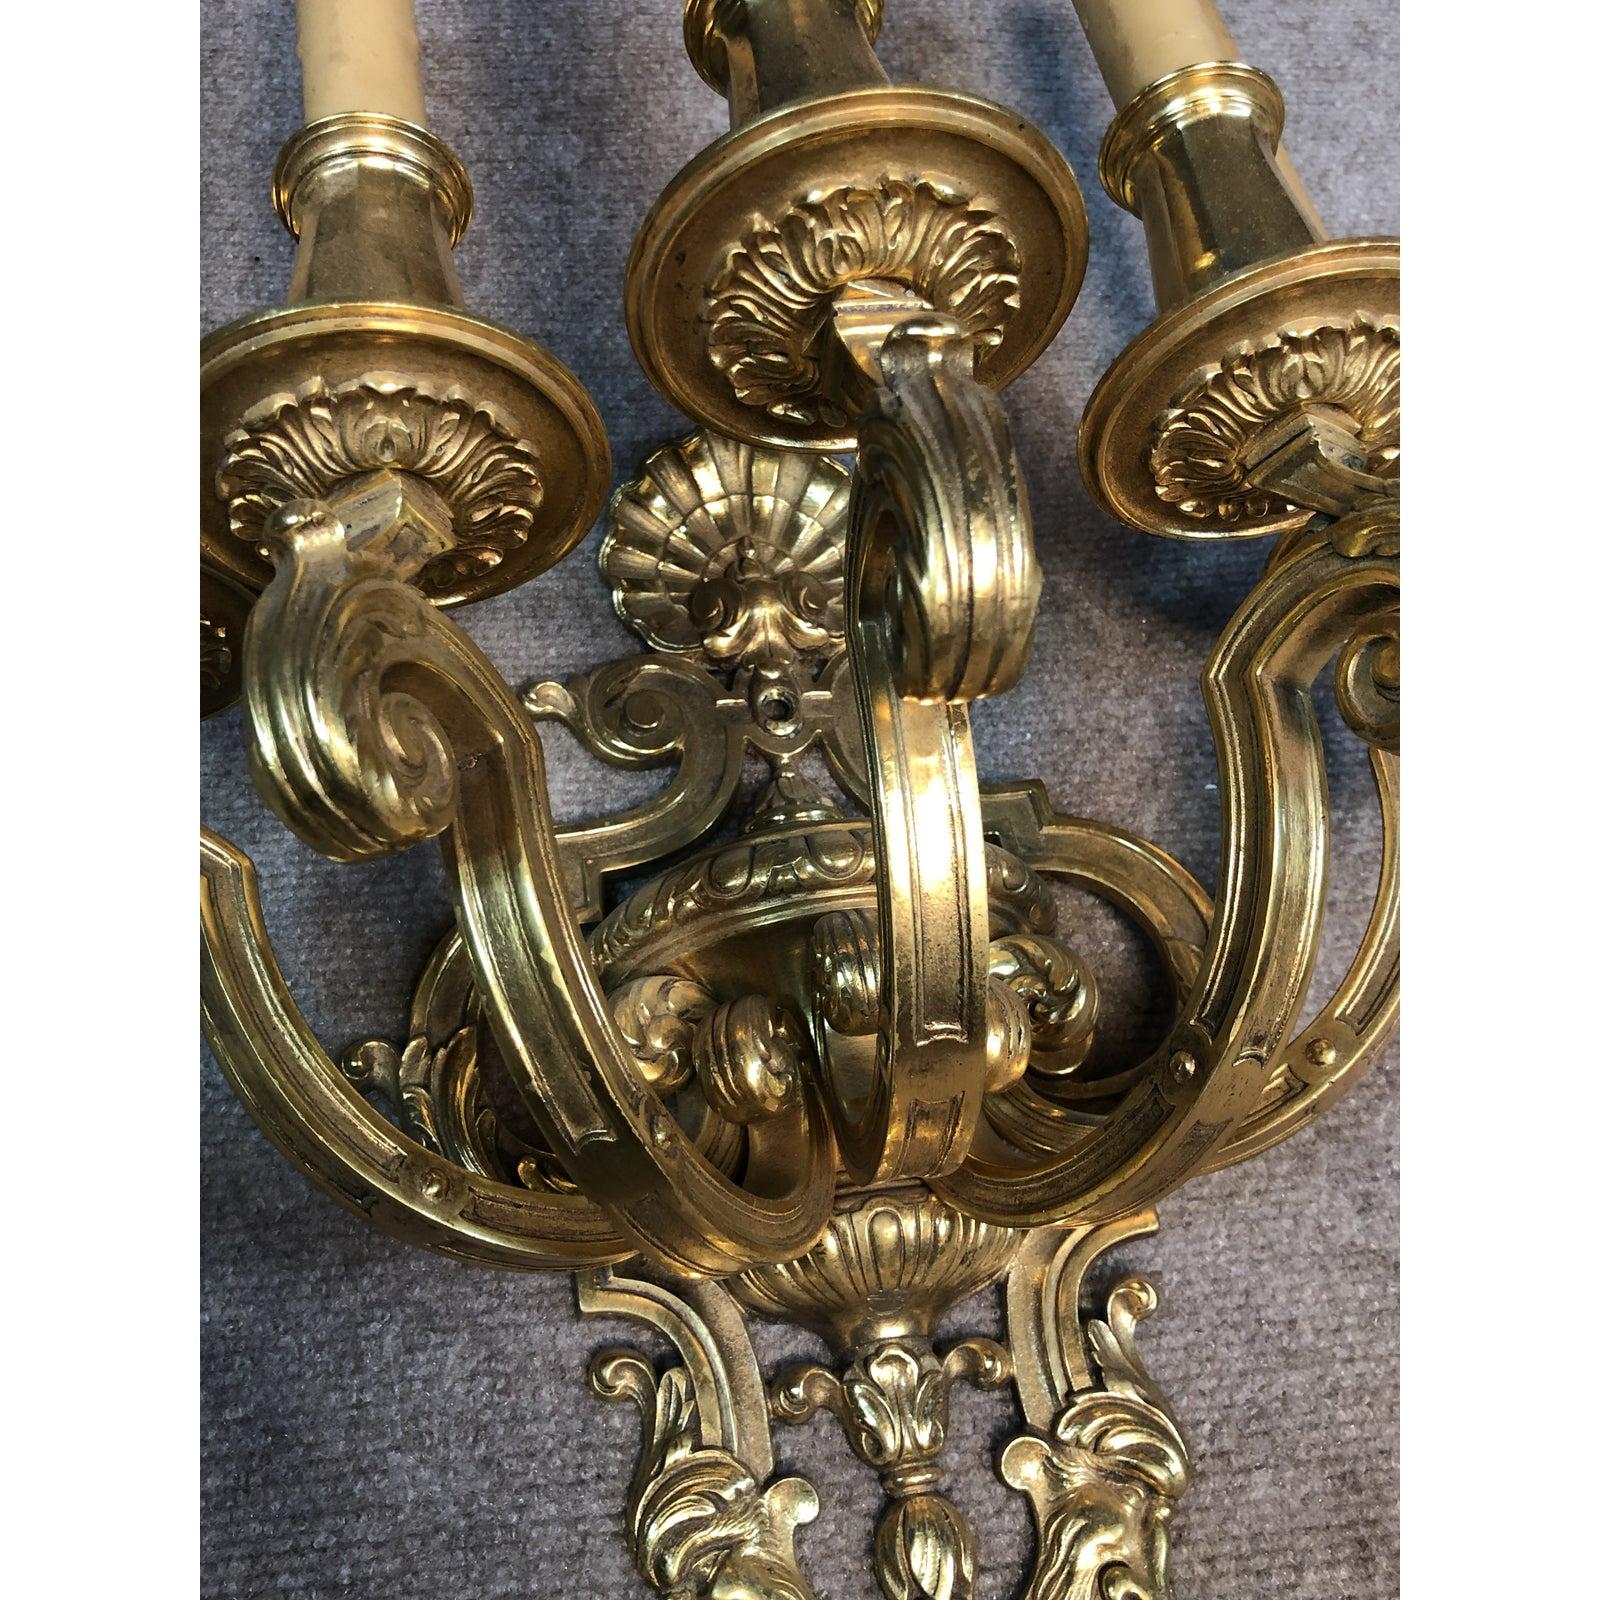 Pair of Antique Renaissance Revival doré bronze wall sconces with shell motif doré.  5-arm wall sconces adorned with grotesque faces and shell form top.